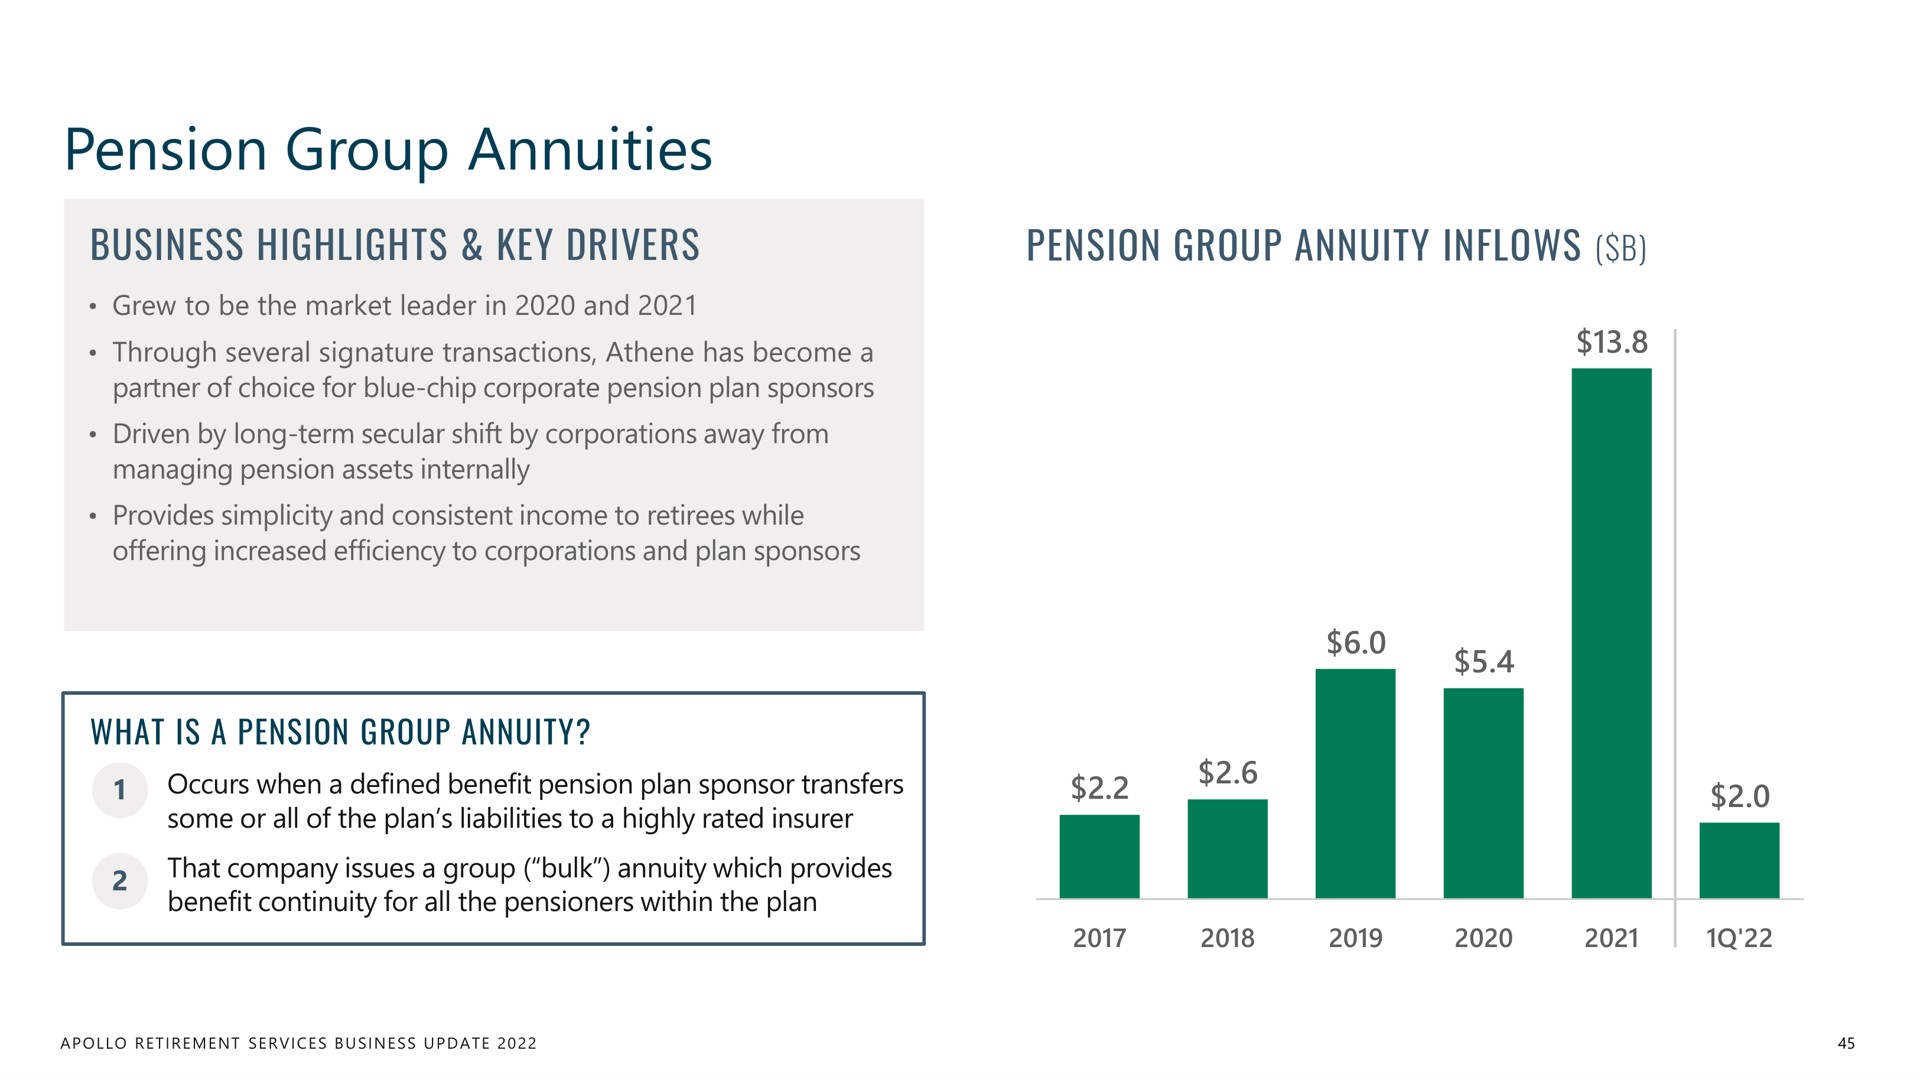 pension group annuities business highlights key drivers | Apollo Global Management